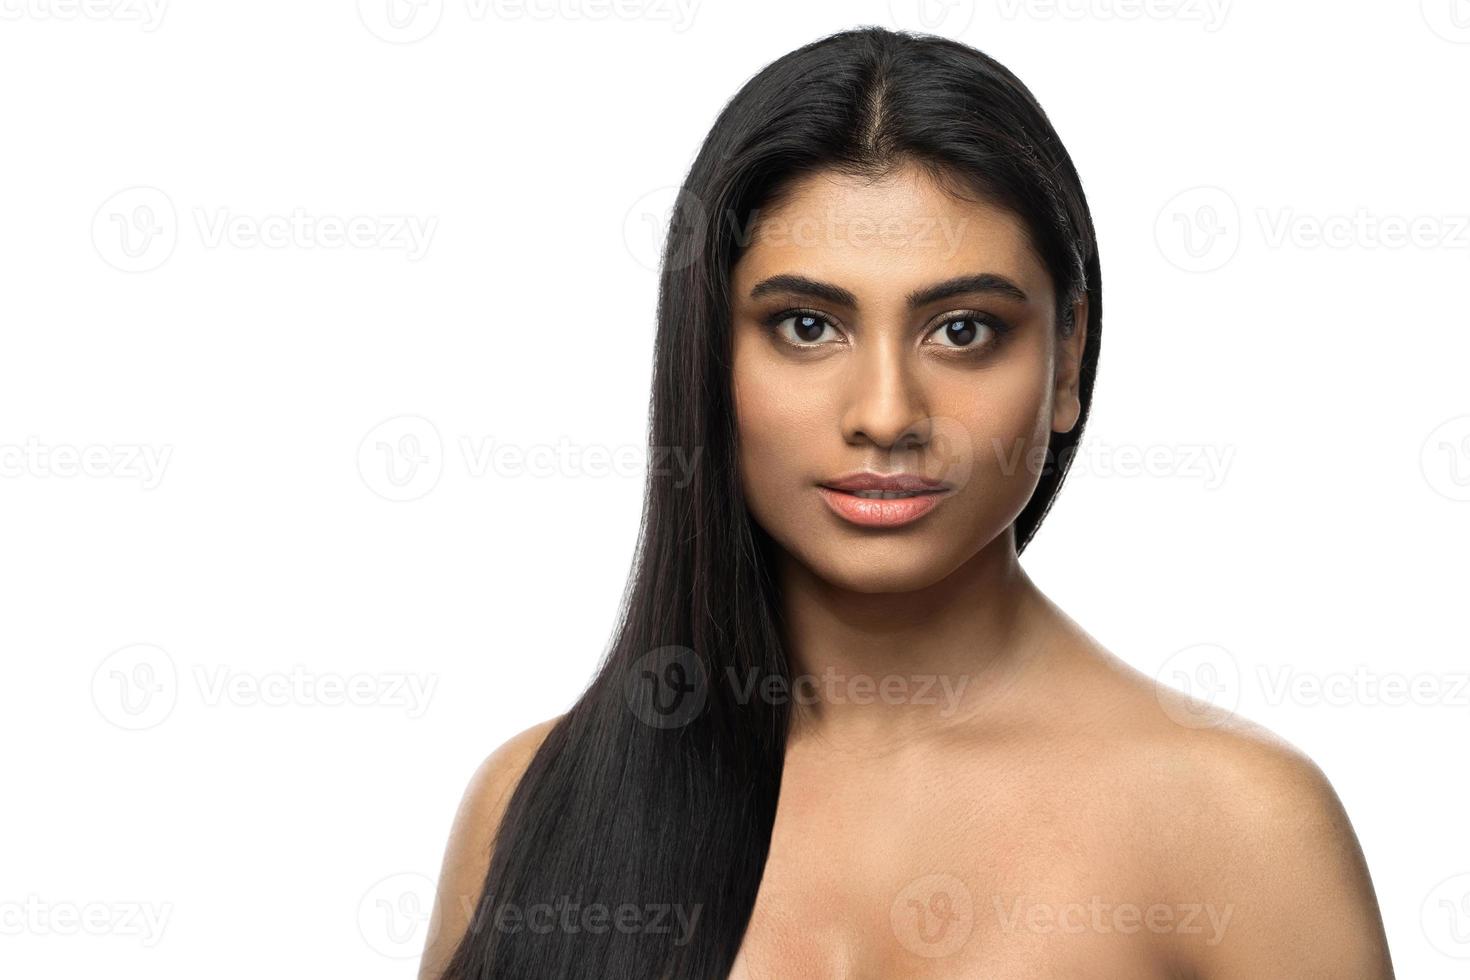 Indian woman with smooth skin and long black hair on white background photo